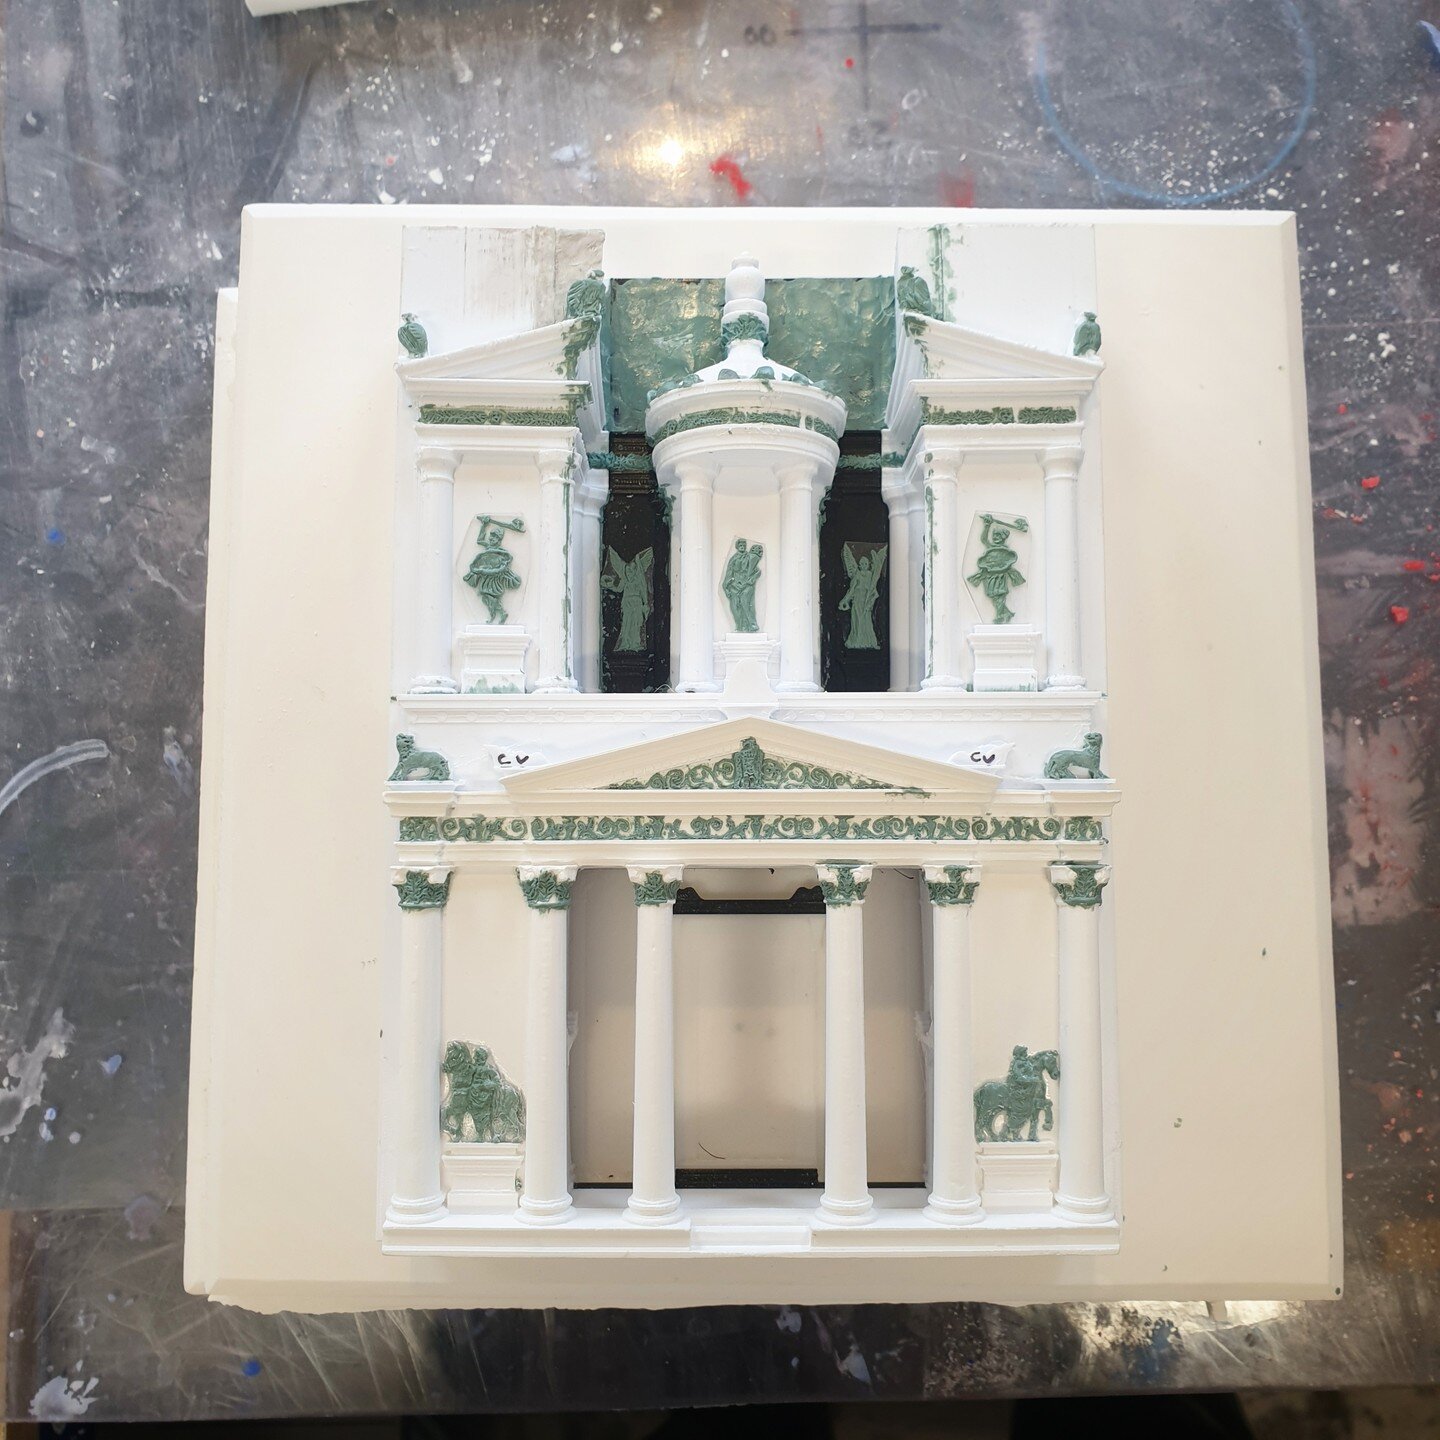 Work in Progress - The treasury of Al-Khazneh.

This has been a new level of challenge for me, mostly in the composition of the overall piece. I originally composed it more in line with my standard single, flat facade - but realised it didn't do the 